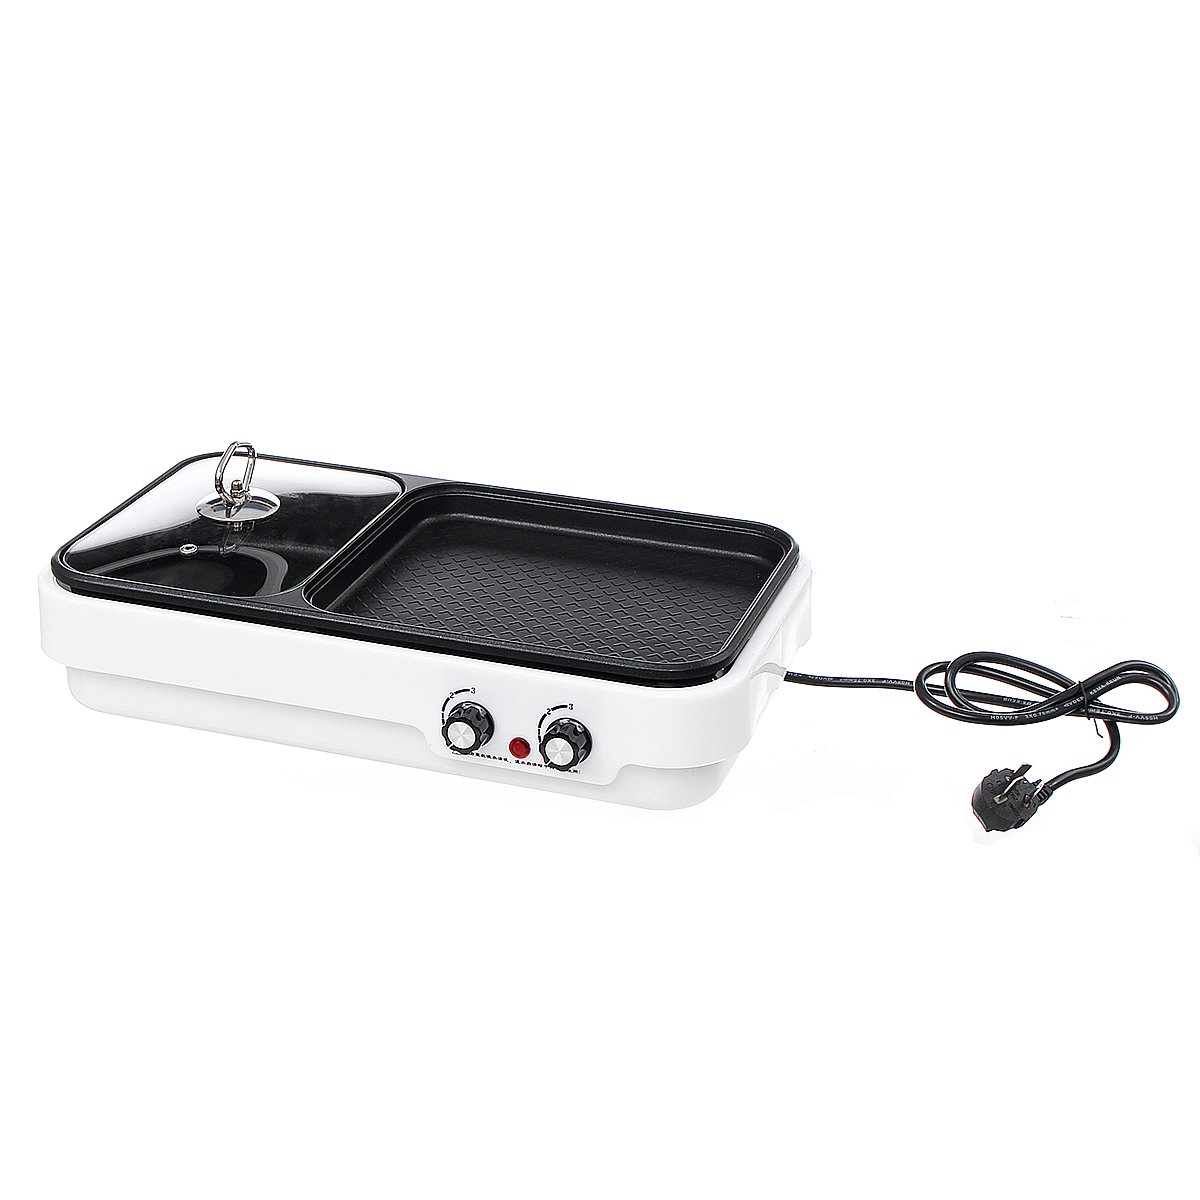 Electric Baking Pan Barbecue Hot Pot Non Stick BBQ Grill Oven Kitchen Cookware 22